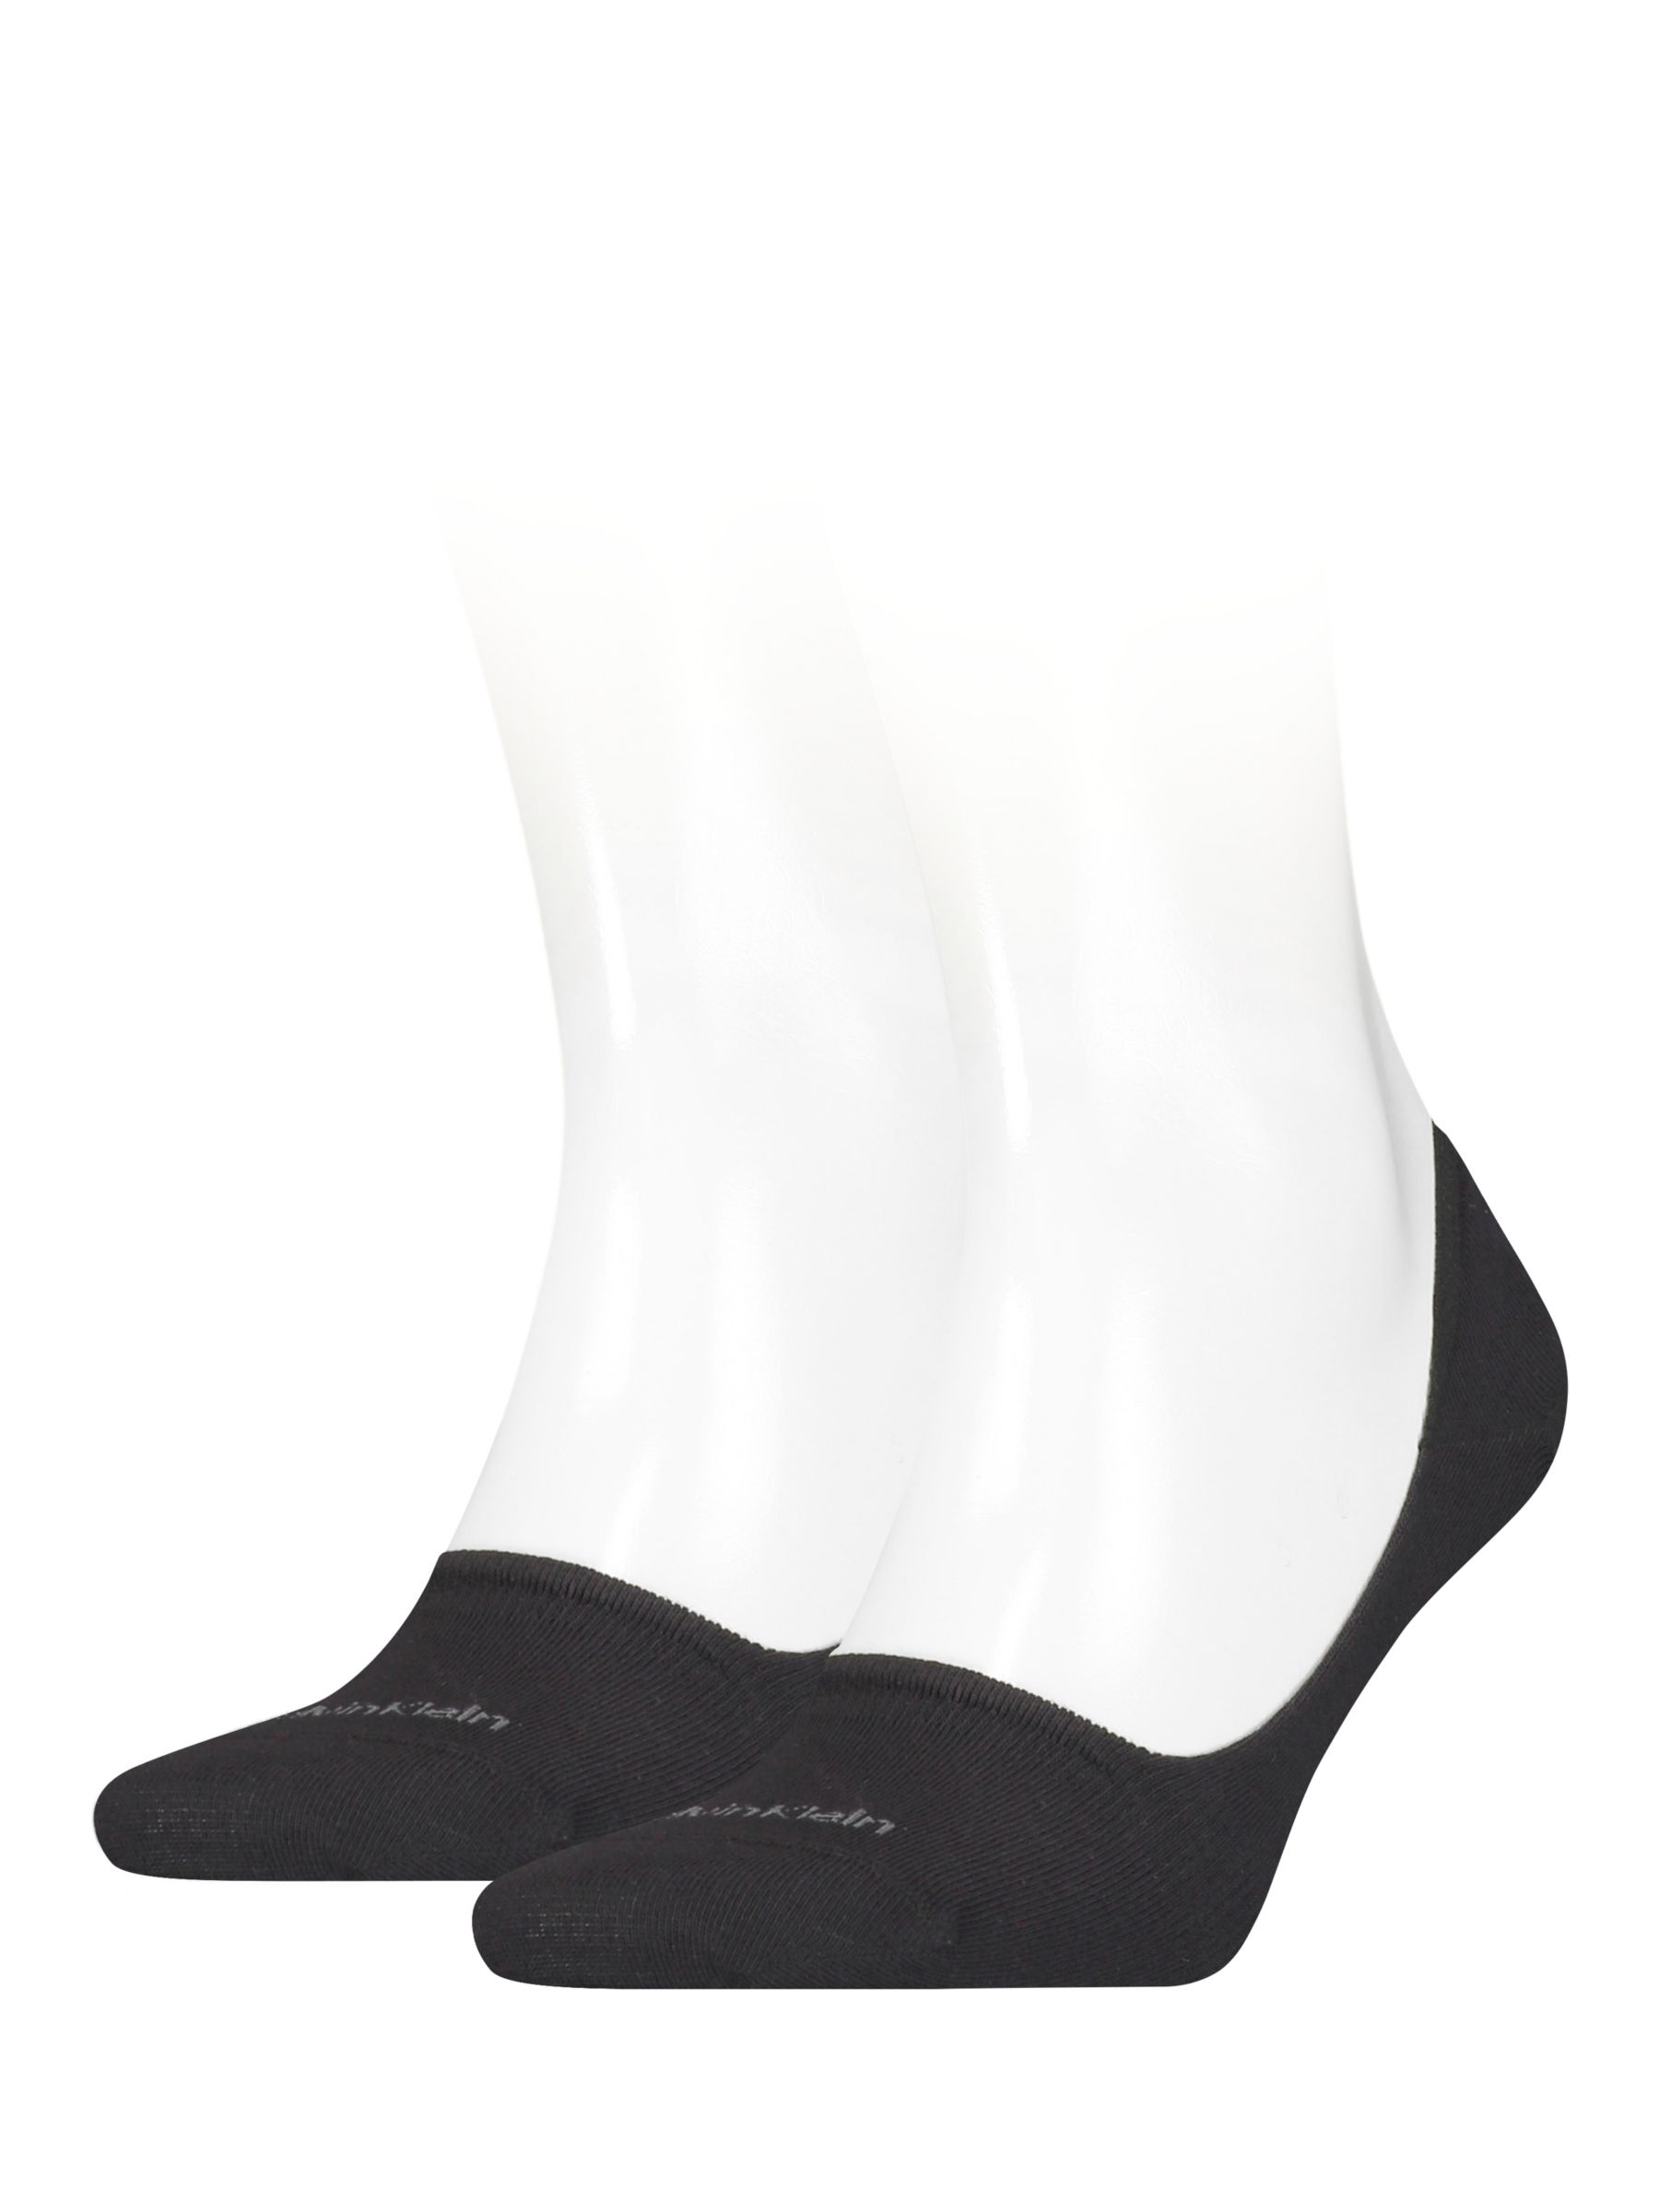 Calvin Klein Invisible Trainer Liner Cotton Socks, Pack of 2, 001 Black, S-M